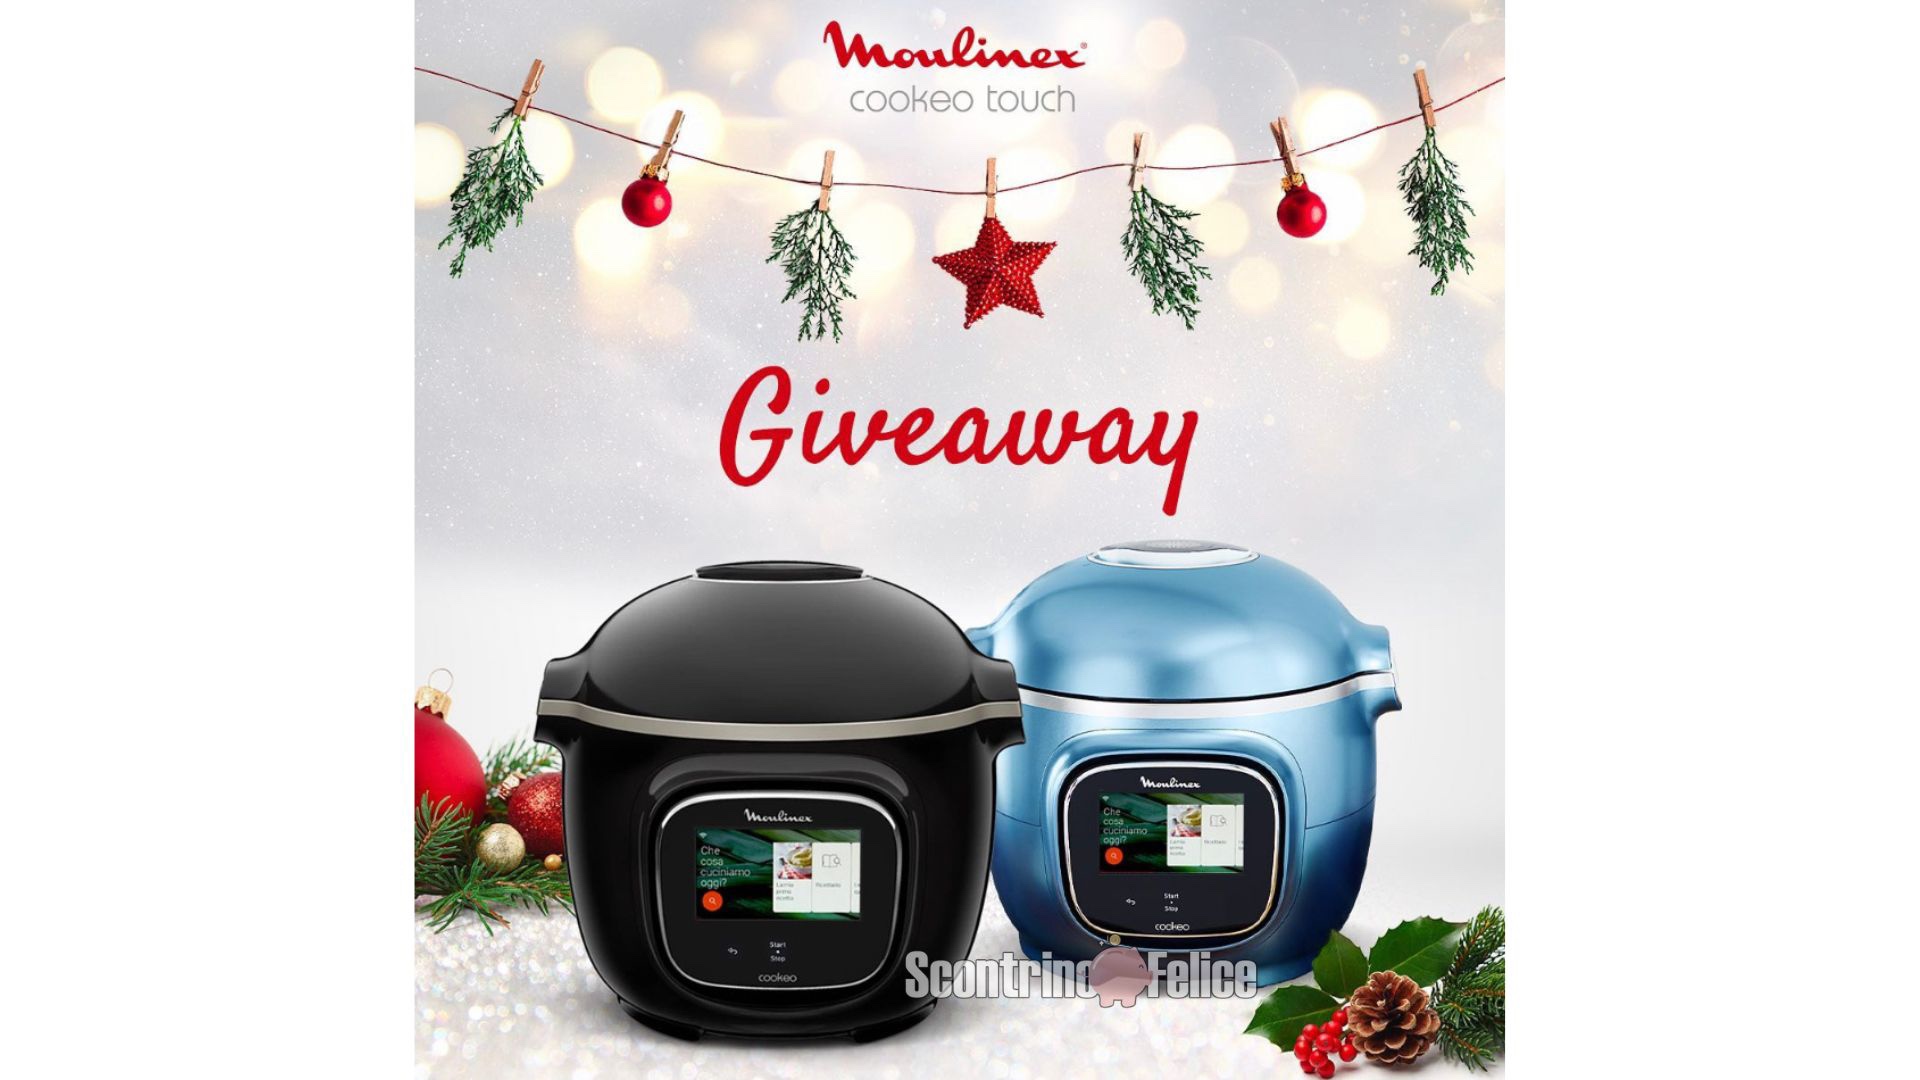 Giveaway Moulinex: vinci gratis Cookeo Touch Wifi 1